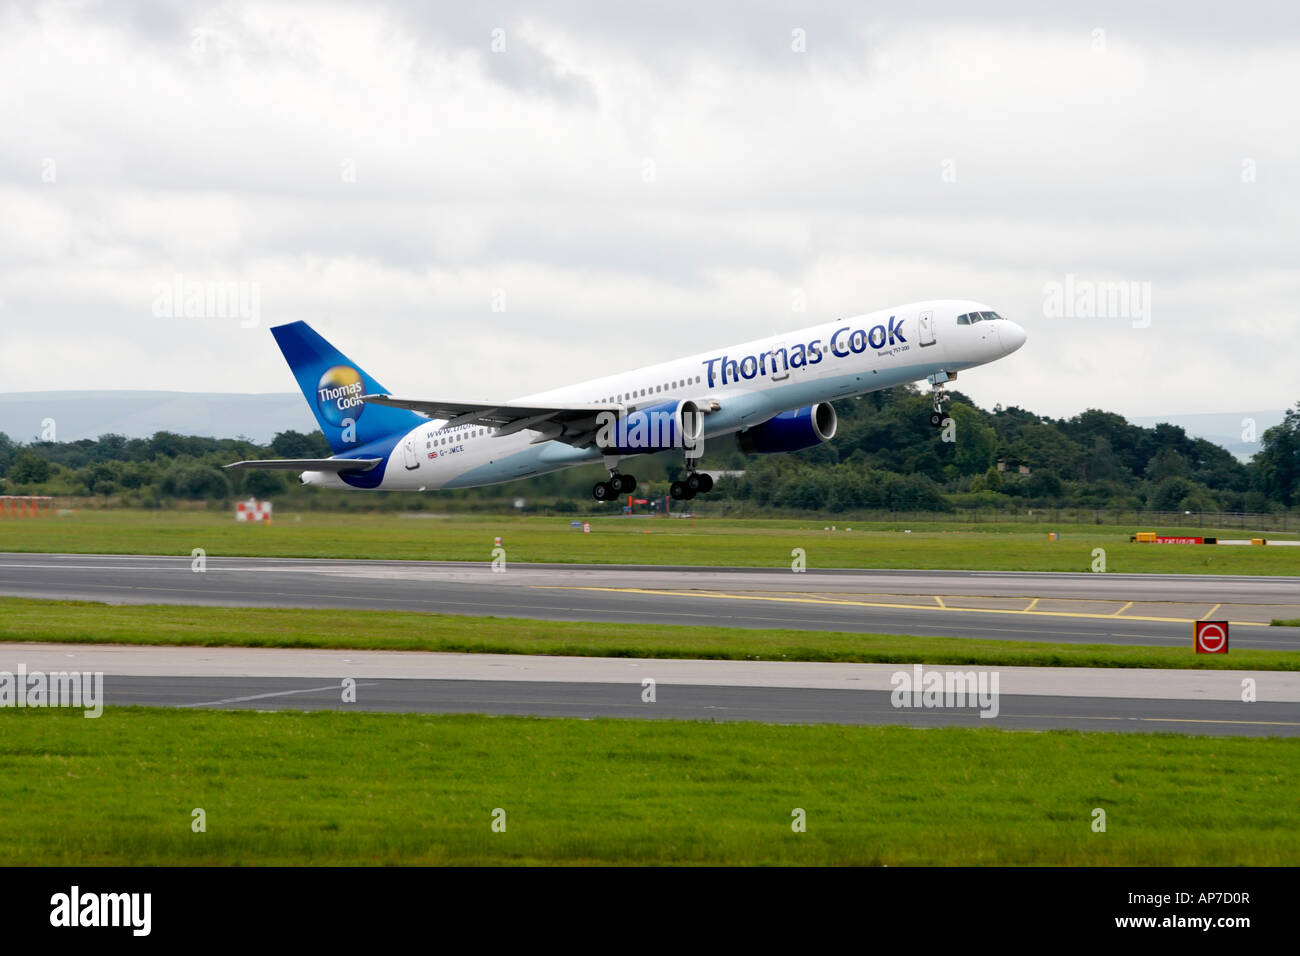 Thomas Cook aircraft taking off from Manchester Airport Stock Photo